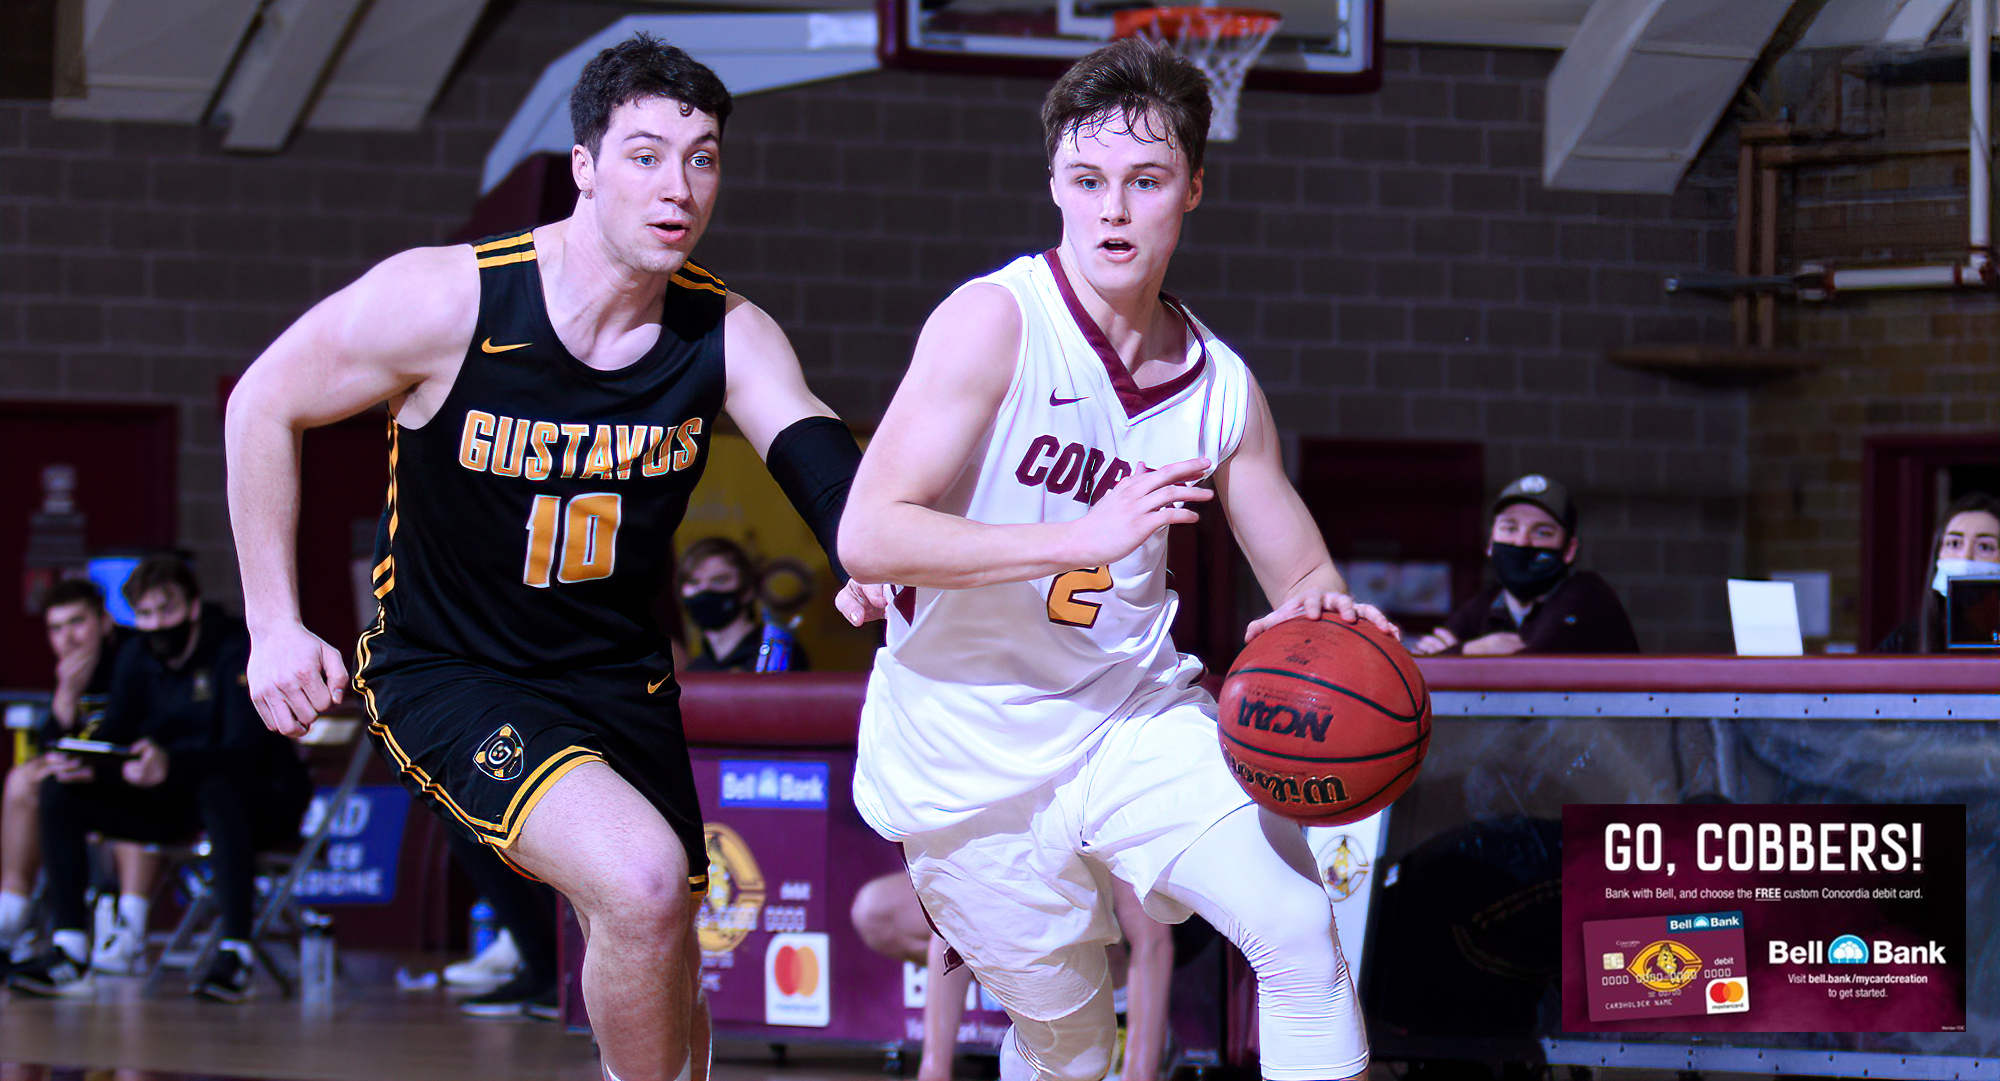 Sophomore Jackson Jangula drives to the basket during the second half of the Cobbers' game with Gustavus. Jangula had a team-high 13 points.